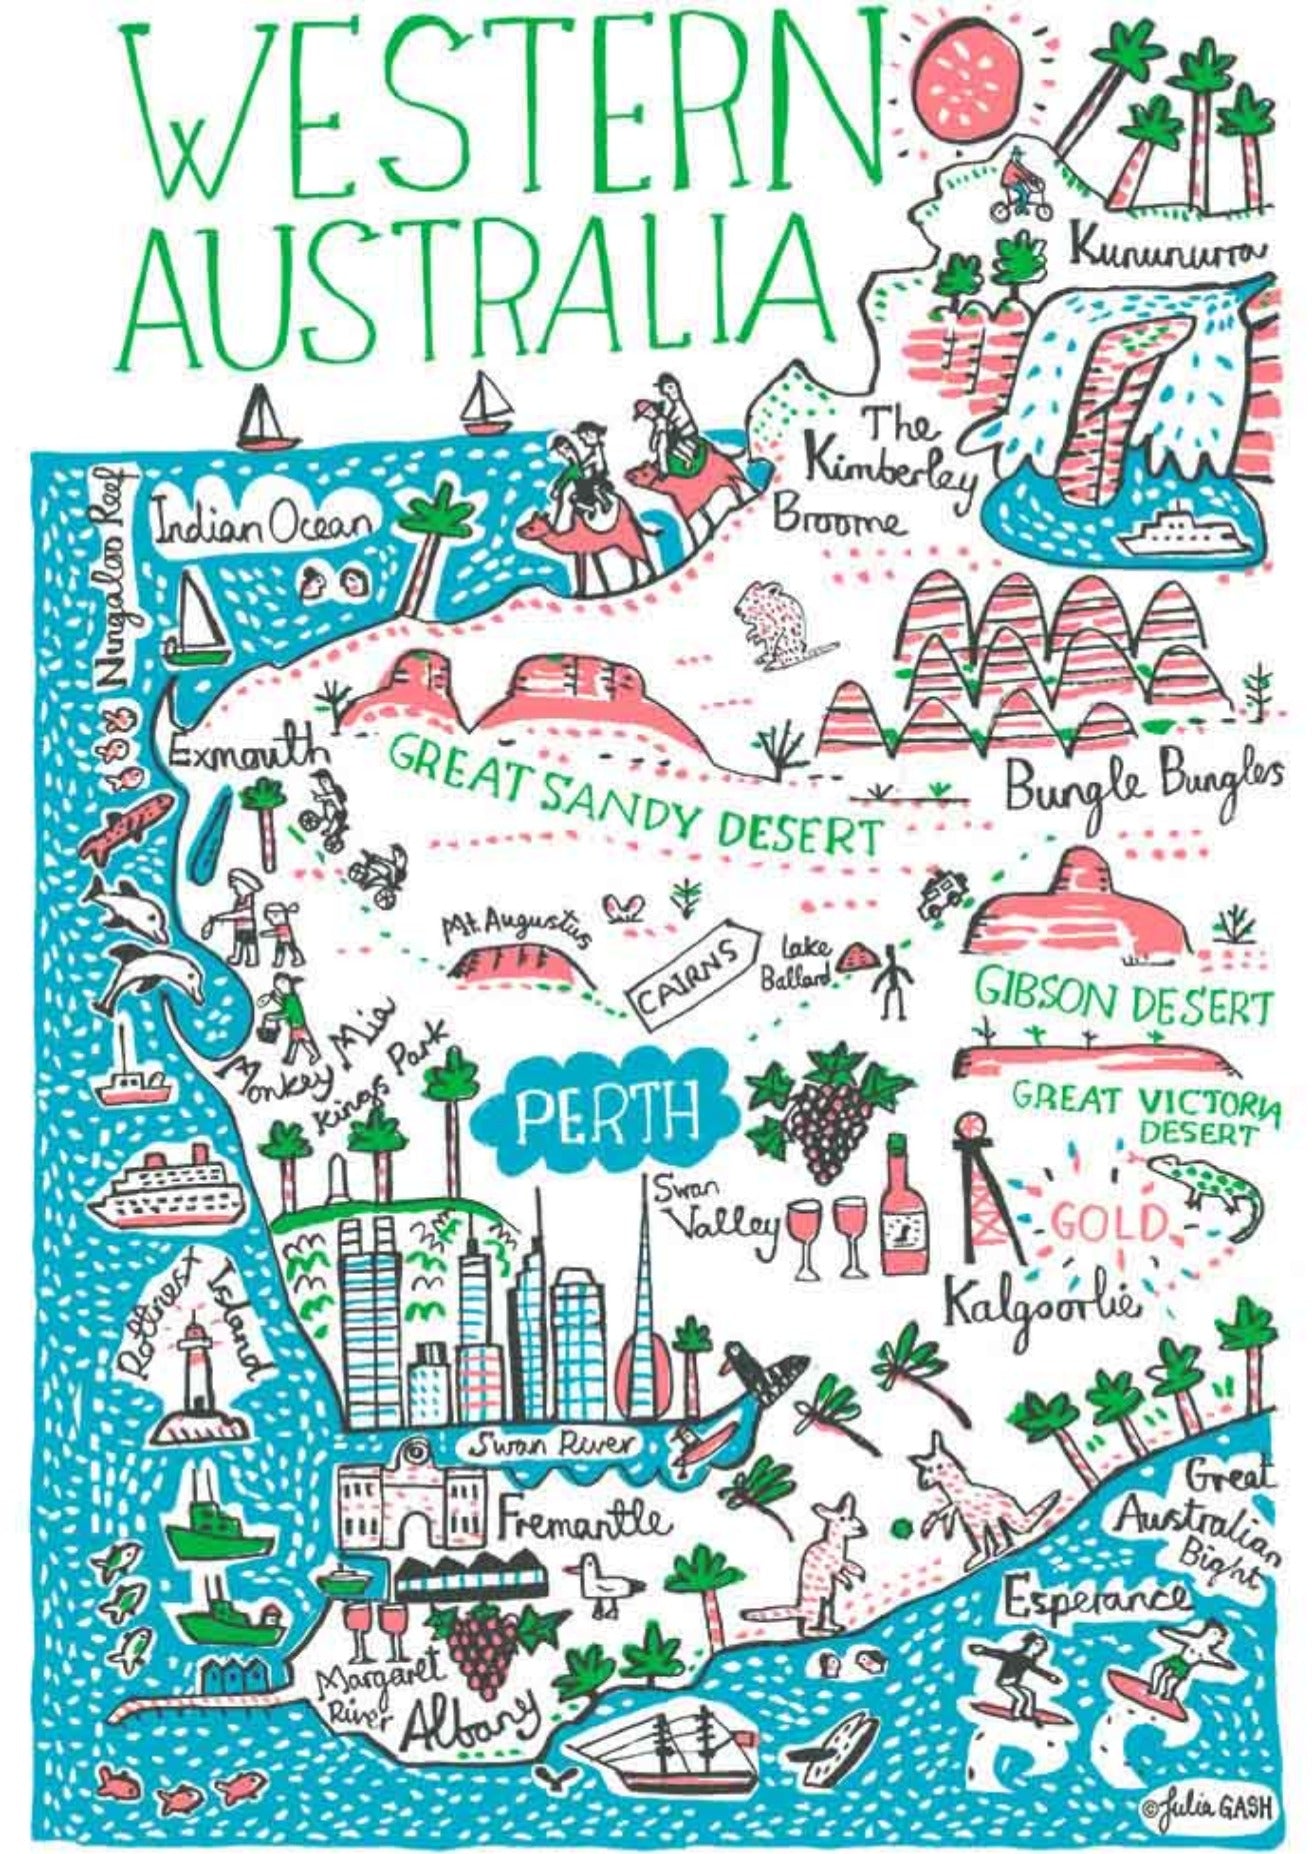 Western Australia travel art print by Julia Gash featuring Perth, Albany and Freemantle